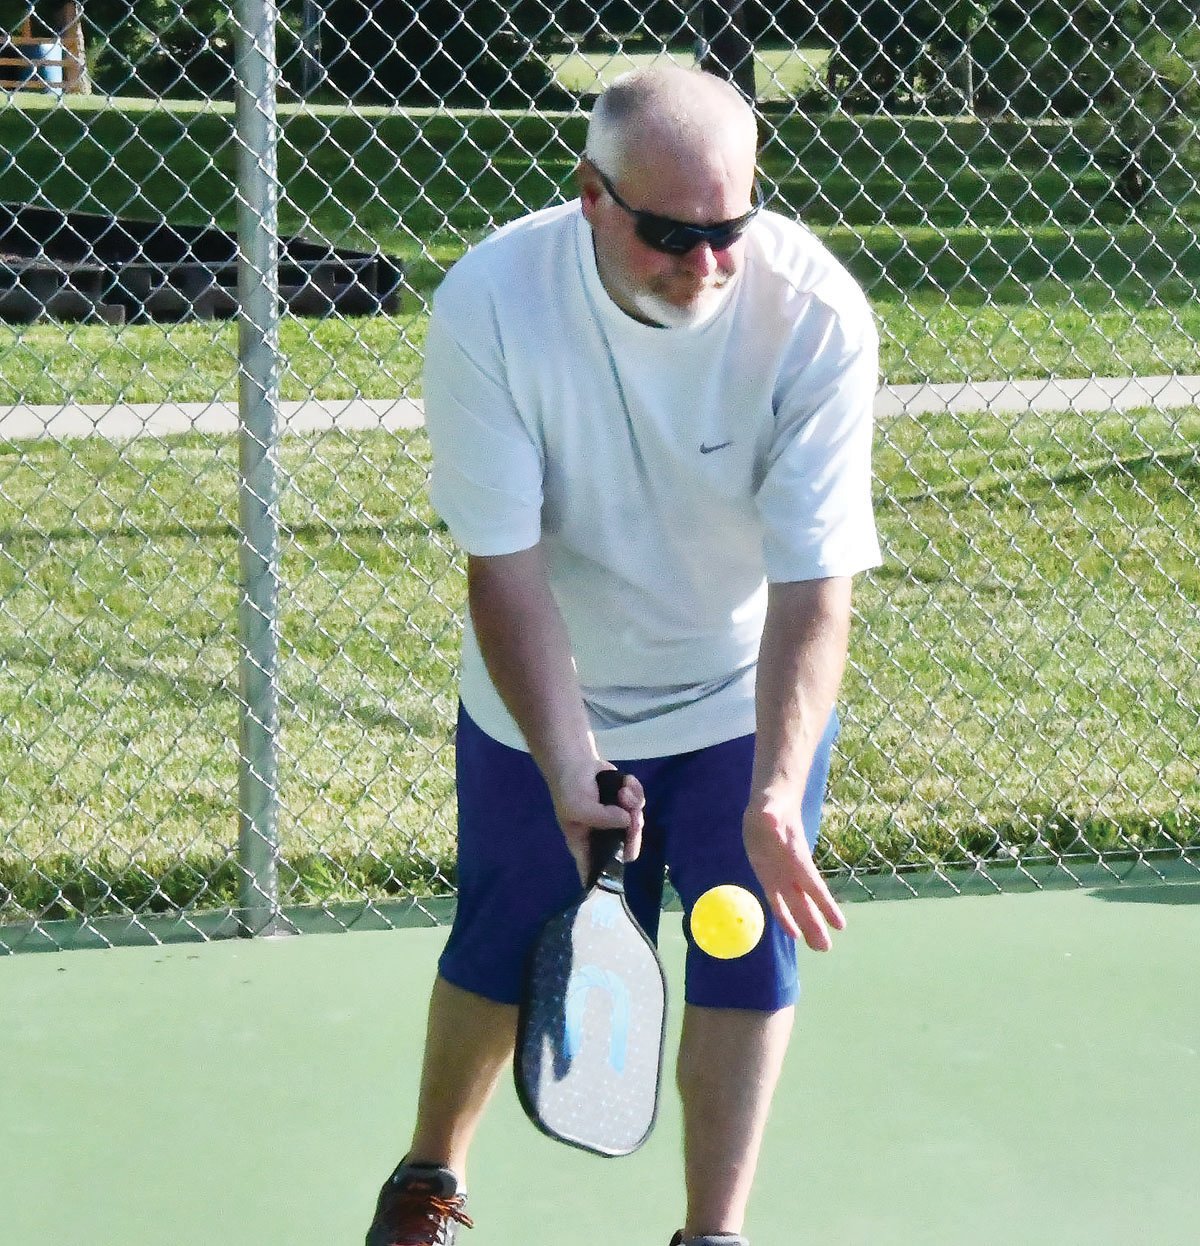 Charlie Hargis prepares to serve during a pickleball match at Fox Park in Moberly. Before the serve in a doubles match, a player will call out the score, which features three numbers.